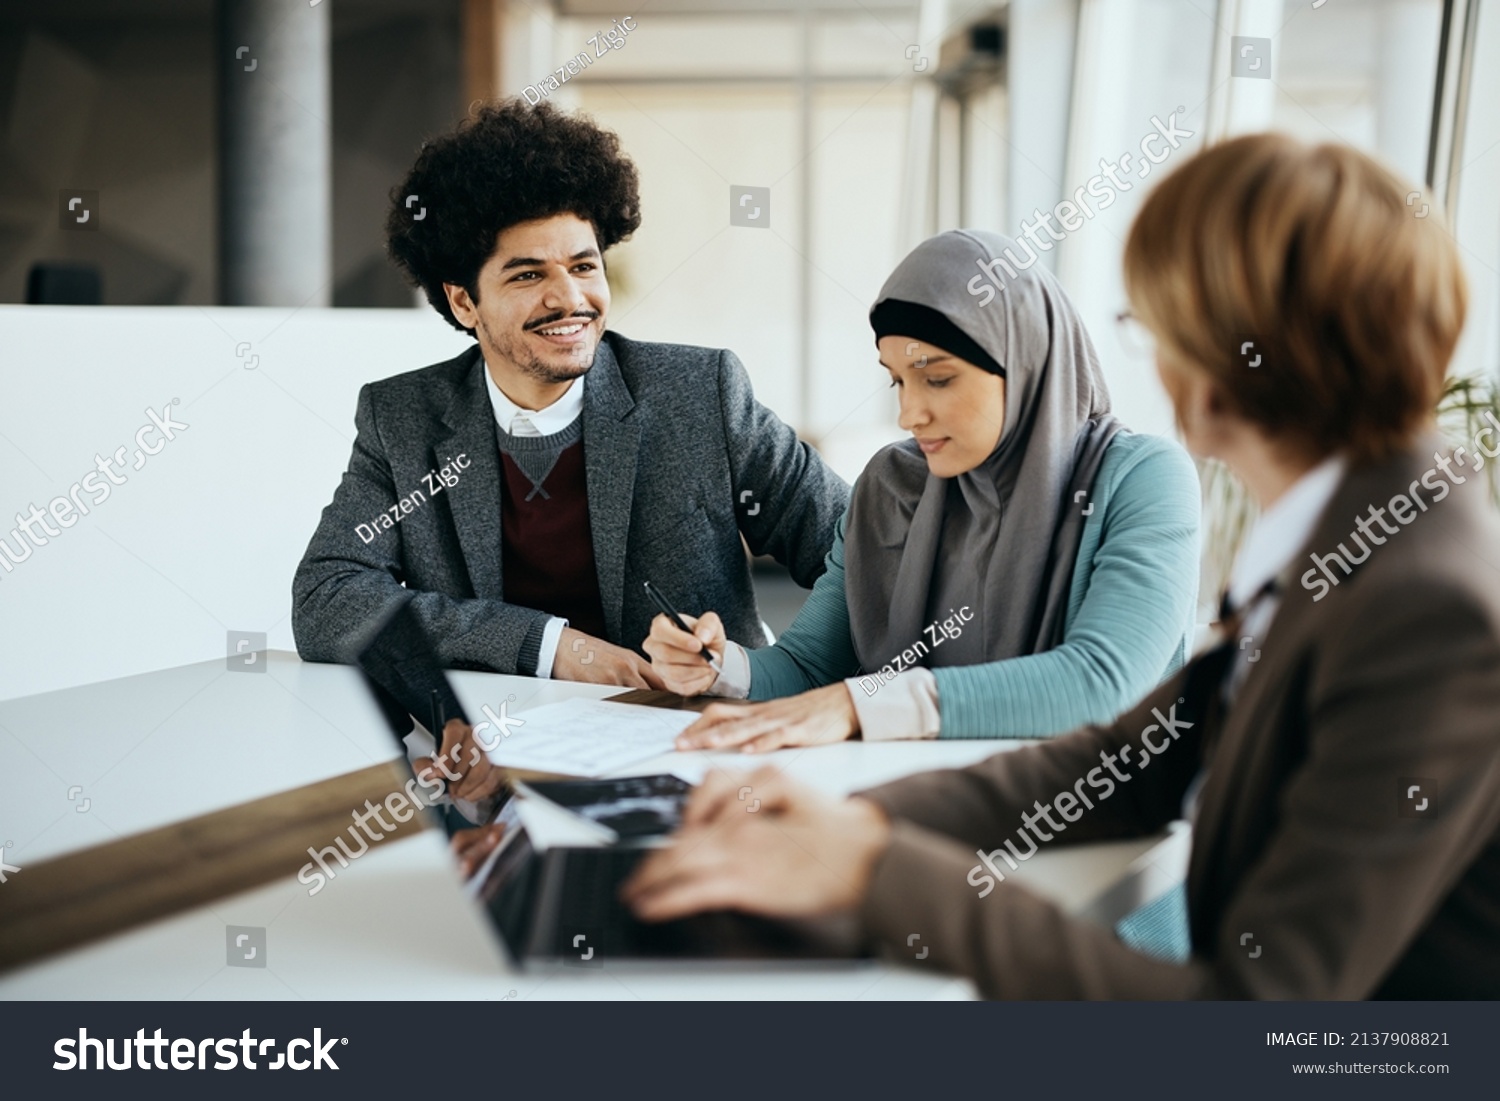 Happy Muslim man talking to financial advisor while his wife is signing paperwork during the meeting in the office.  #2137908821